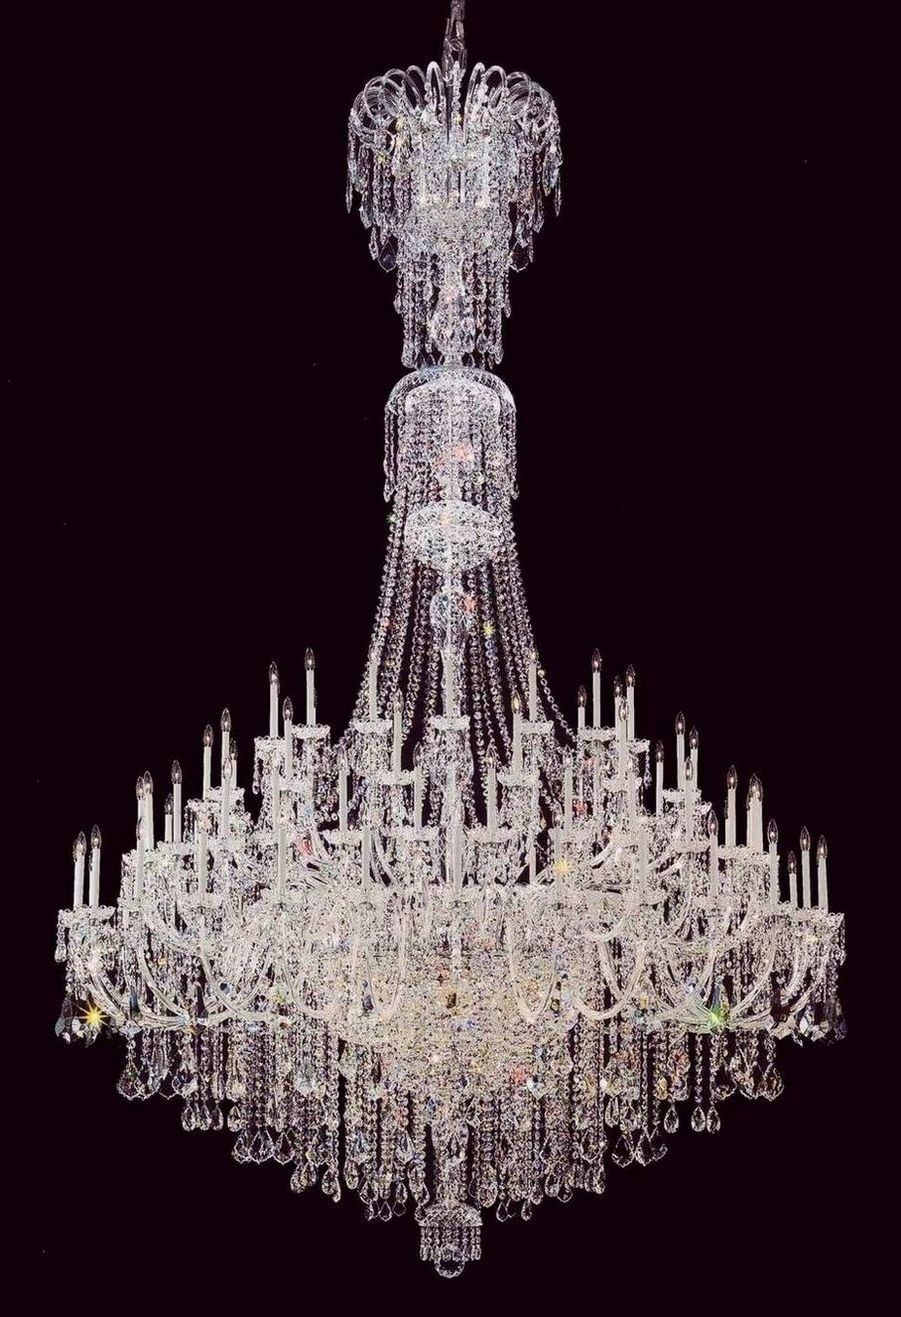 Antique Chandeliers Lighting Tiffany Windows Large Crystal For Big Crystal Chandelier (View 2 of 15)